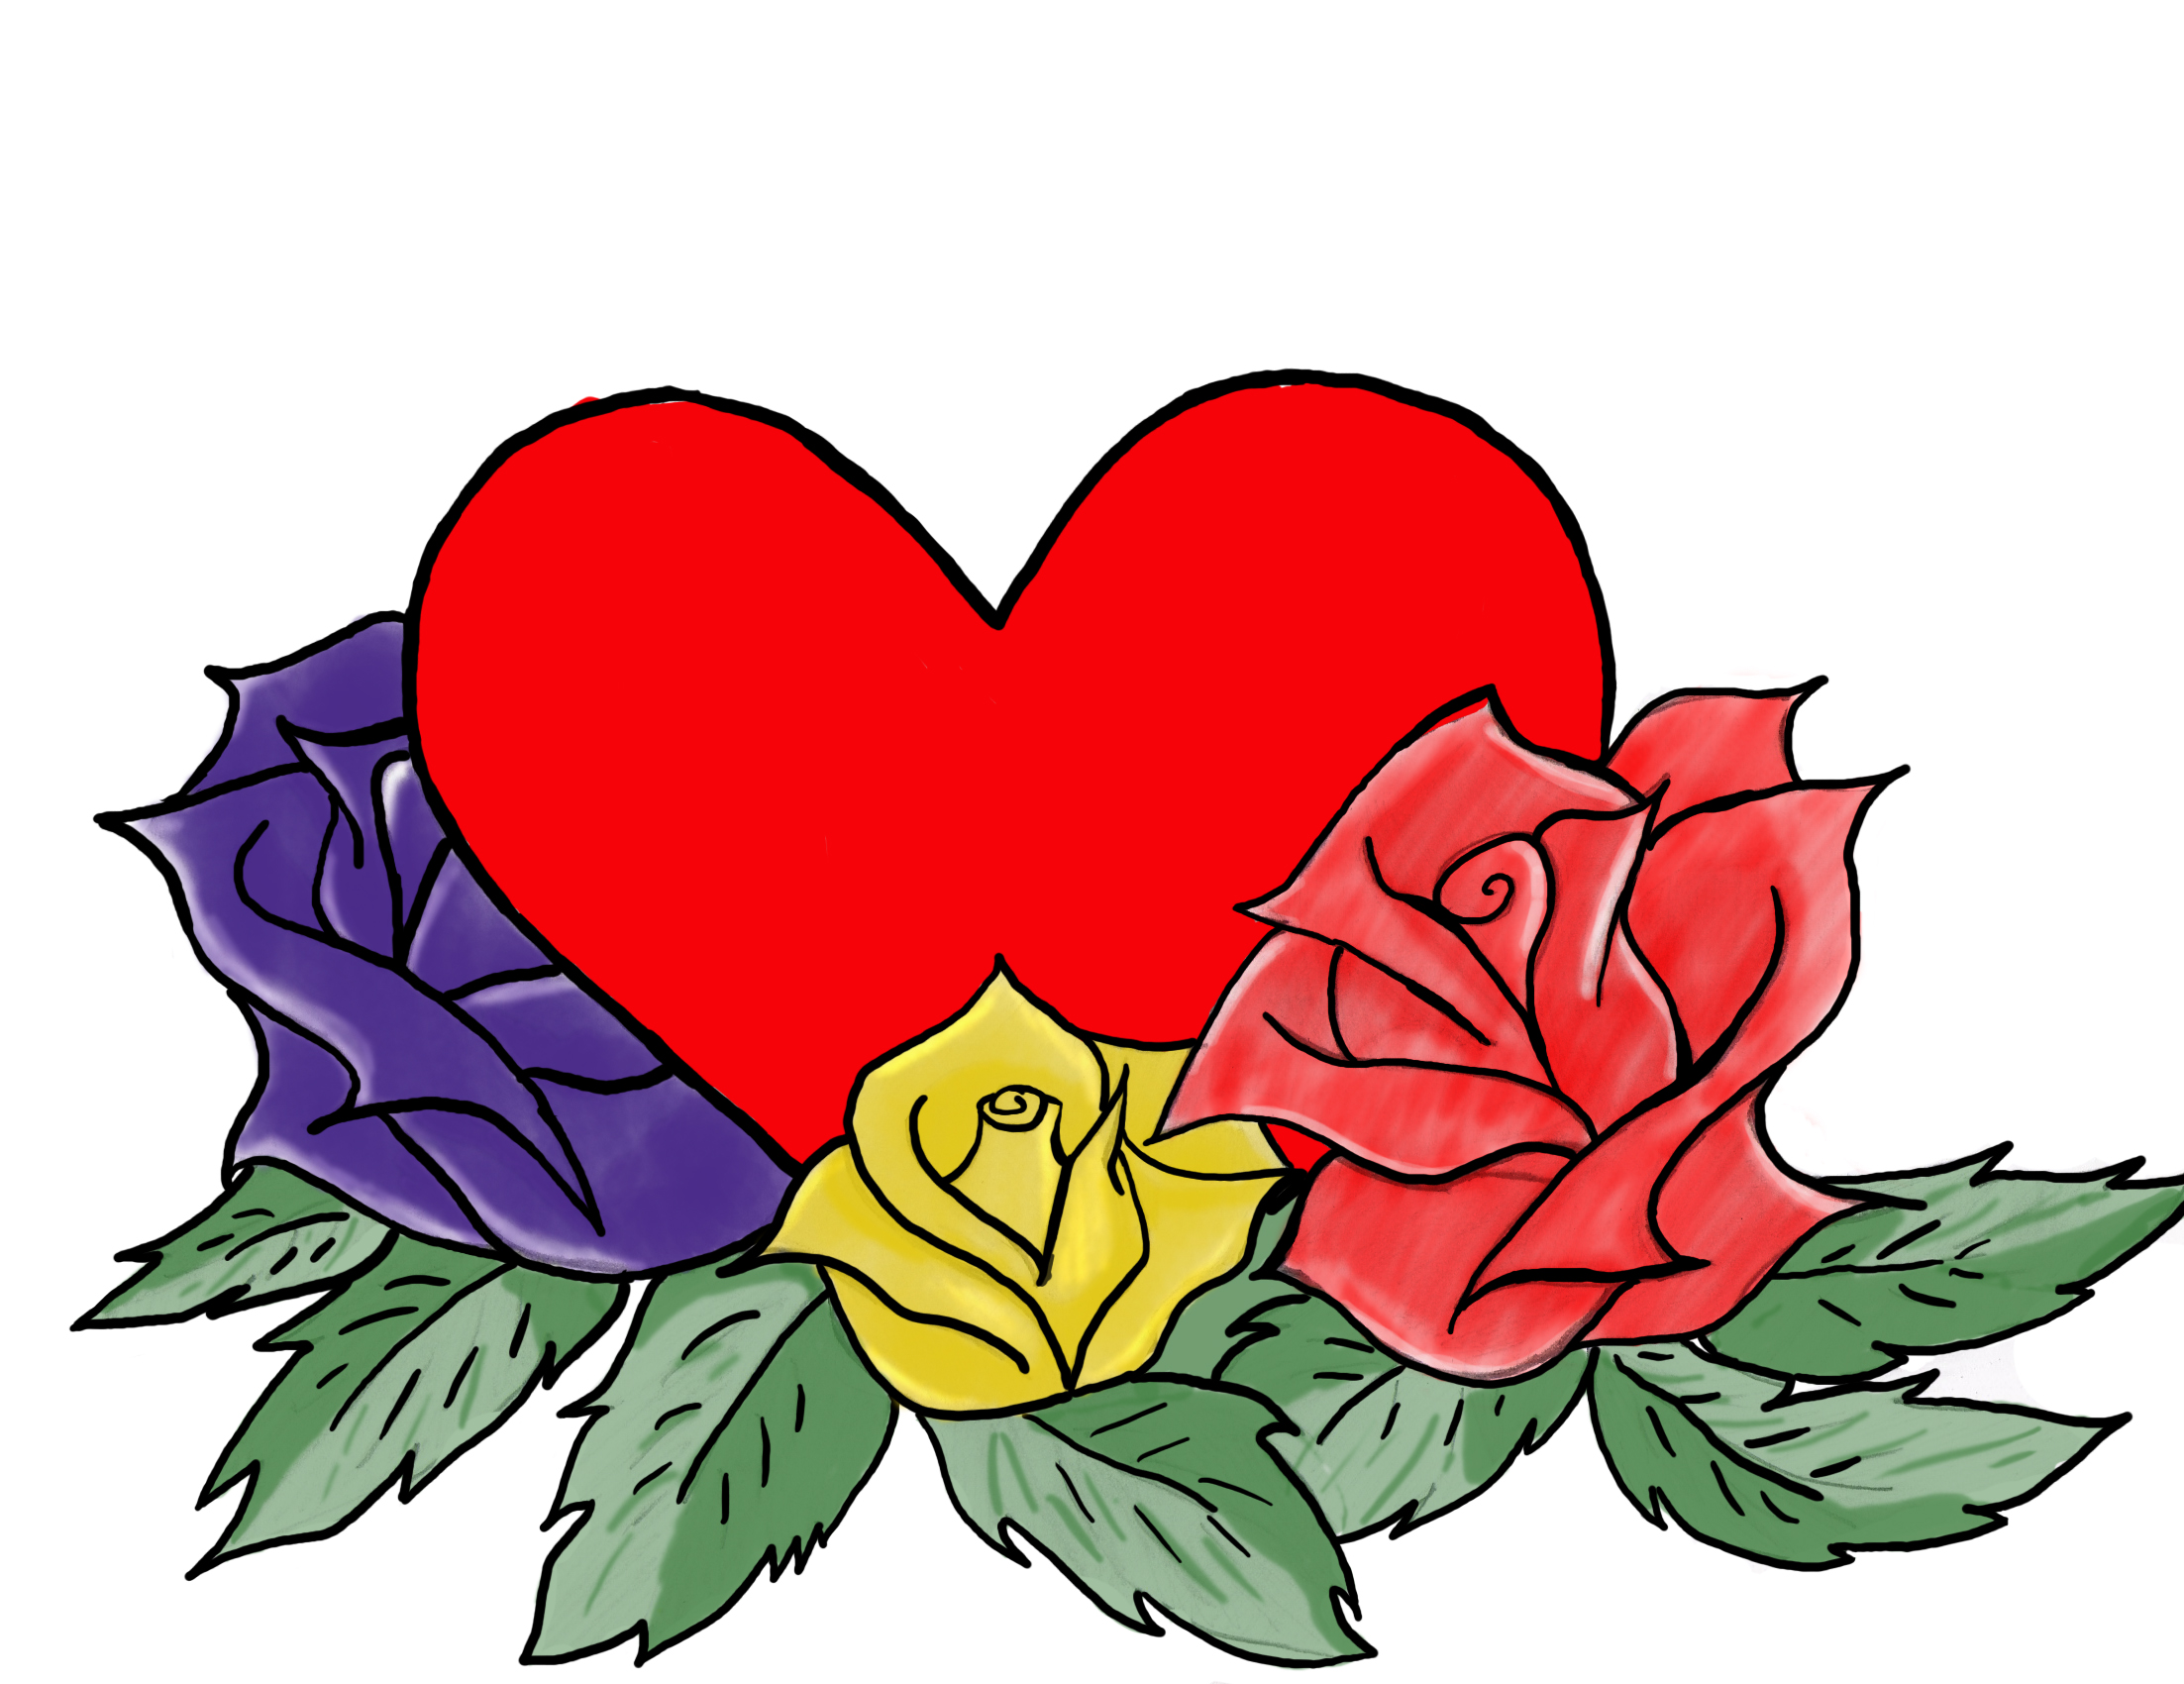 Heart And Roses Colored Drawing - Crochetamommy © 2014 - Apr 23, 2011